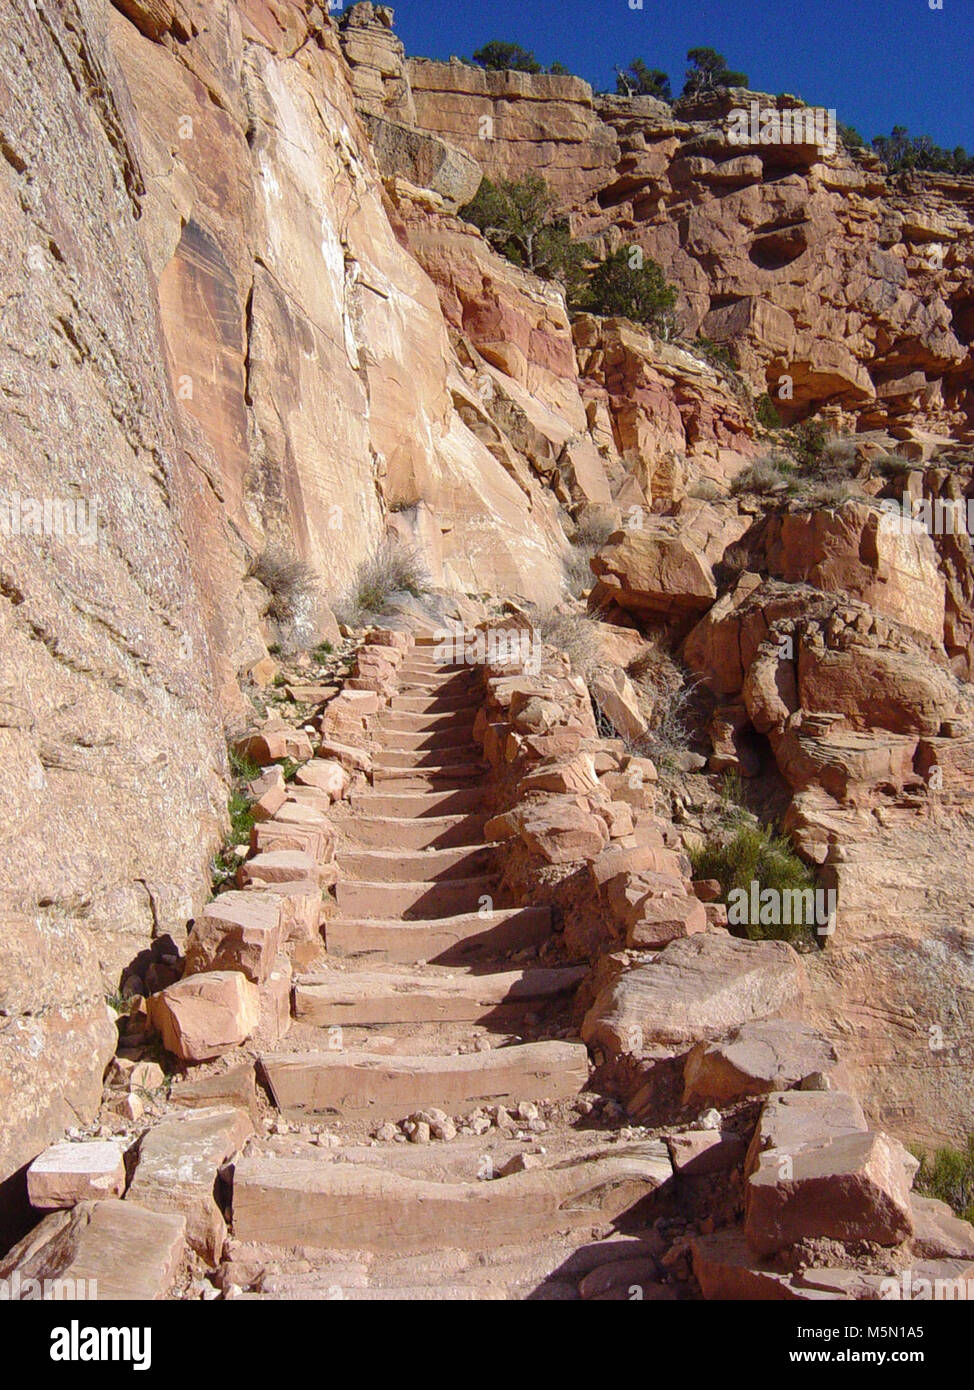 D South Kaibab Trail Stairway Above Ooh Aah Point - . STAIRWAY THROUGH THE COCONINO SANDSTONE ON THE SOUTH KAIBAB TRAIL JUST ABOVE OHH AHH POINT. GRAND CANYON NATIONAL PARK Stock Photo